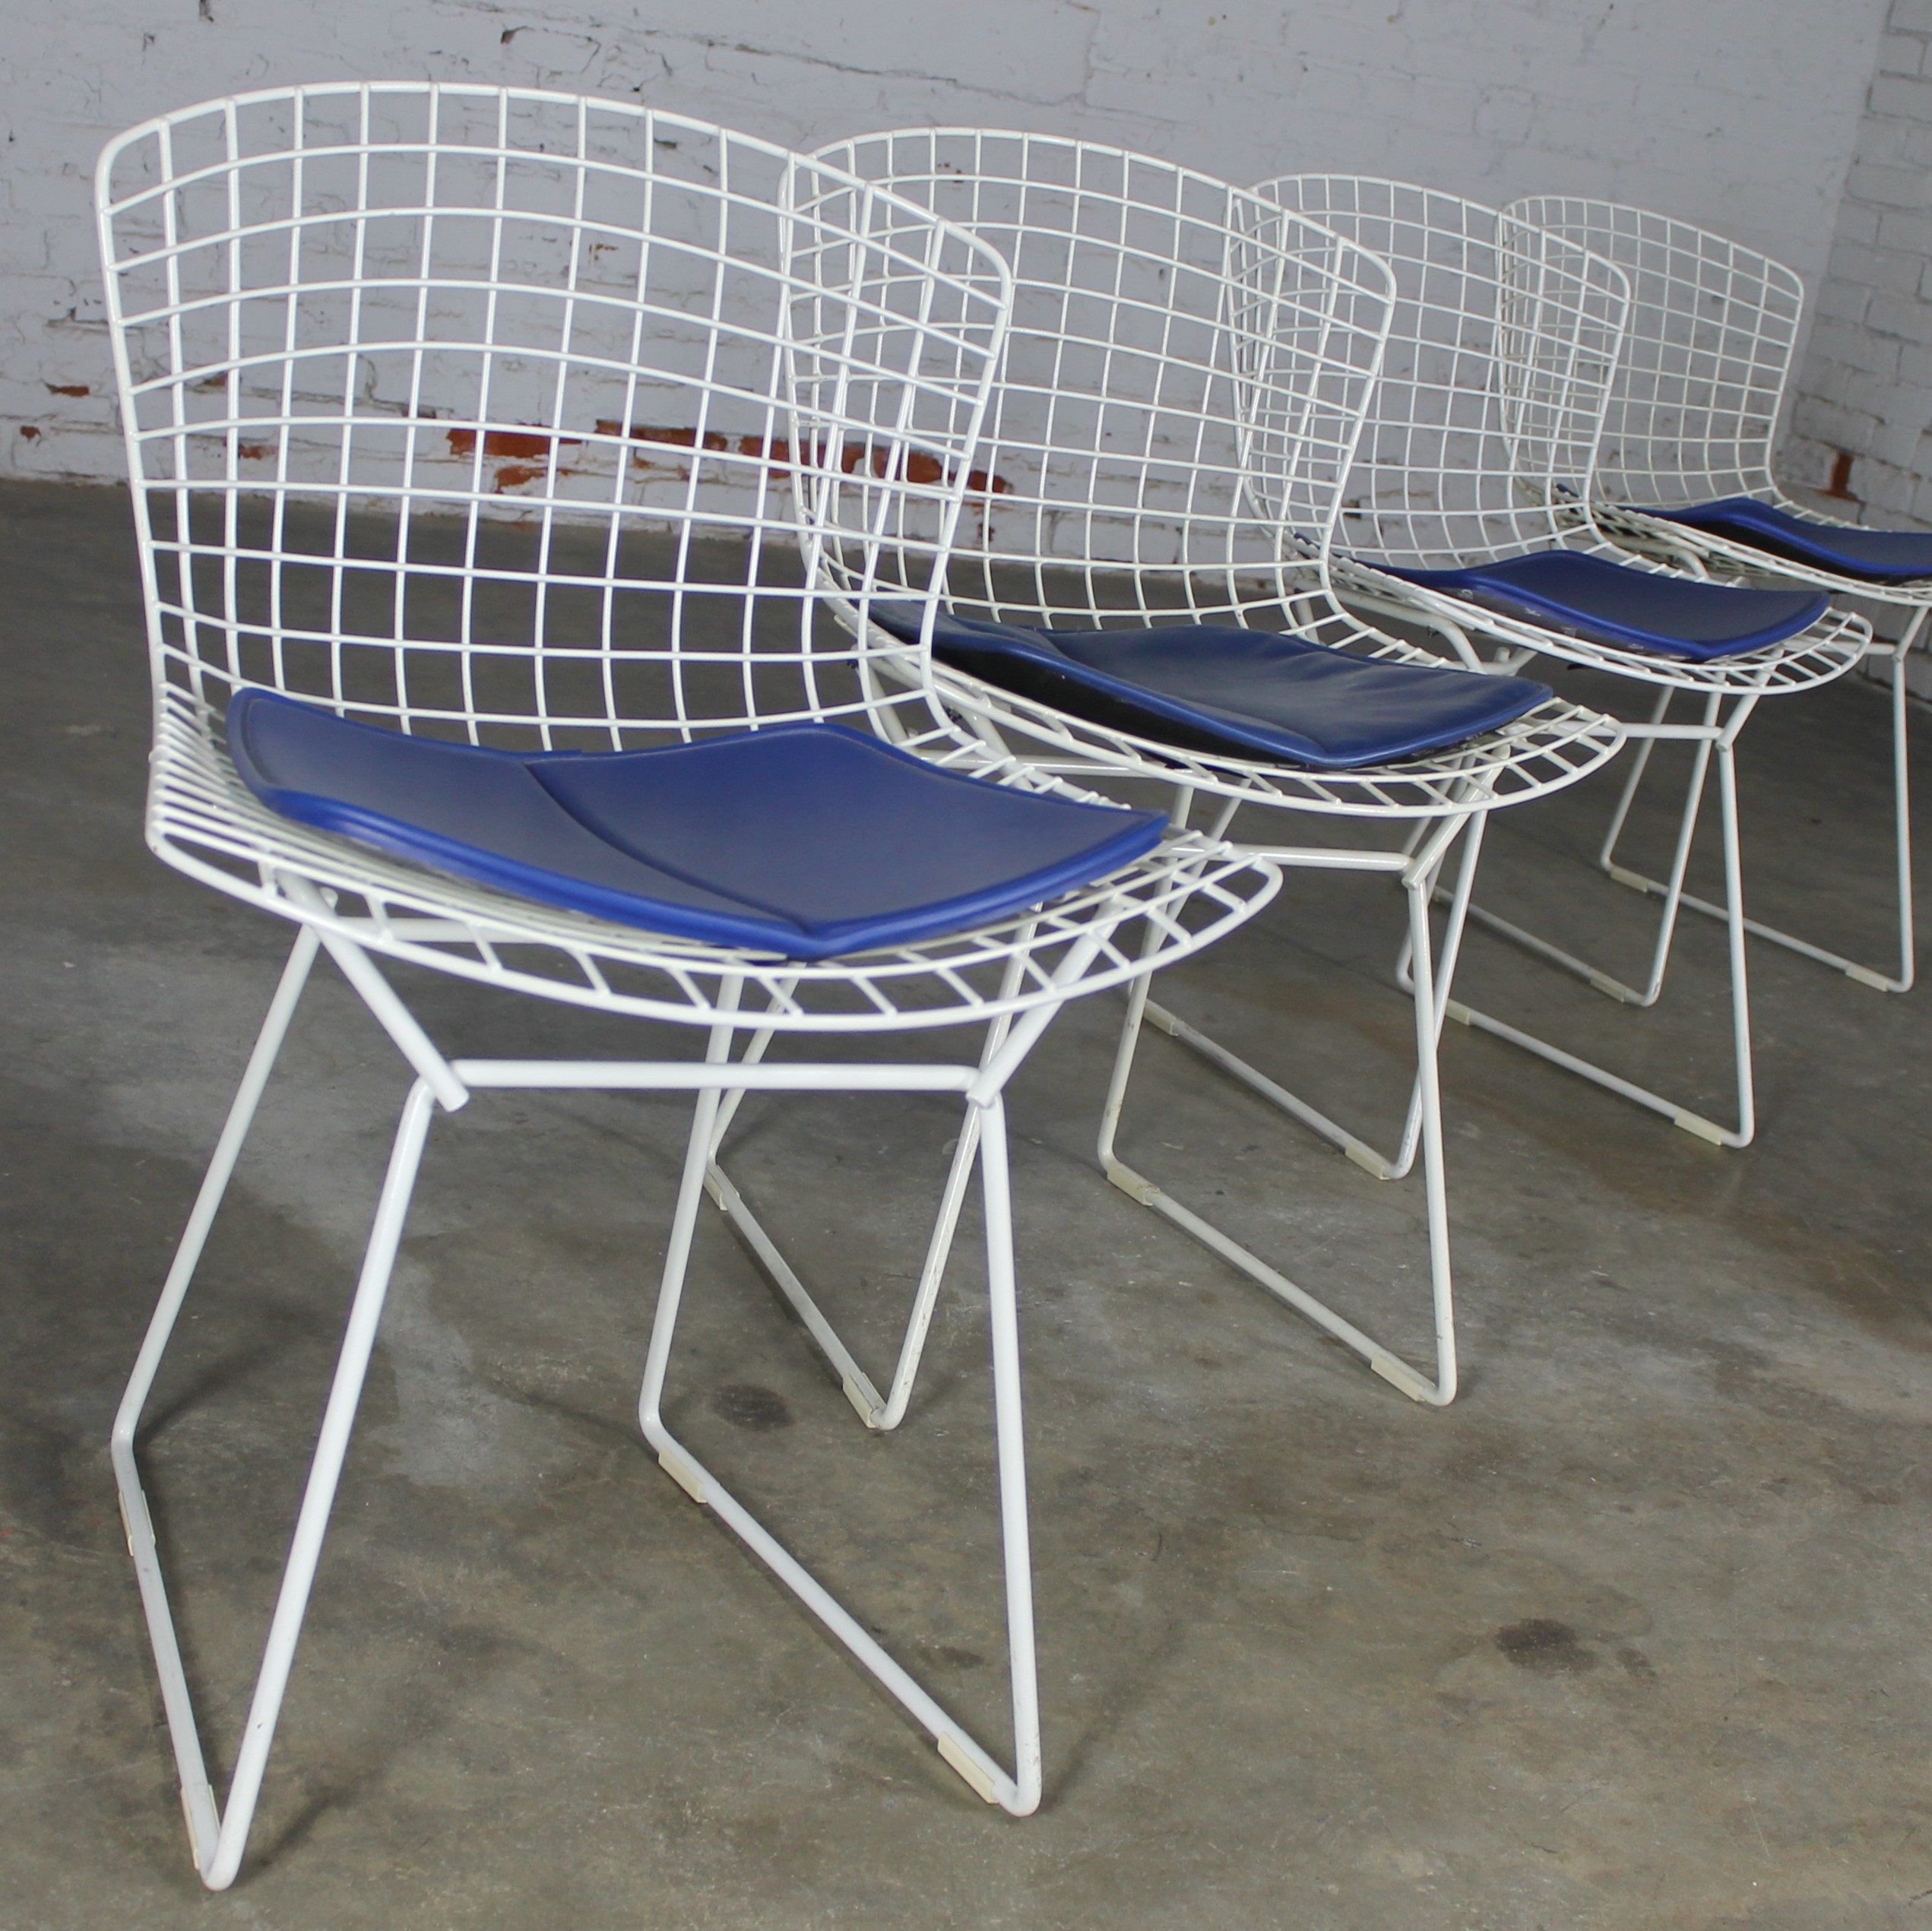 Vintage Mid-Century Modern Bertoia White Wire Side Chairs w/Blue Seat Pads Set of 4